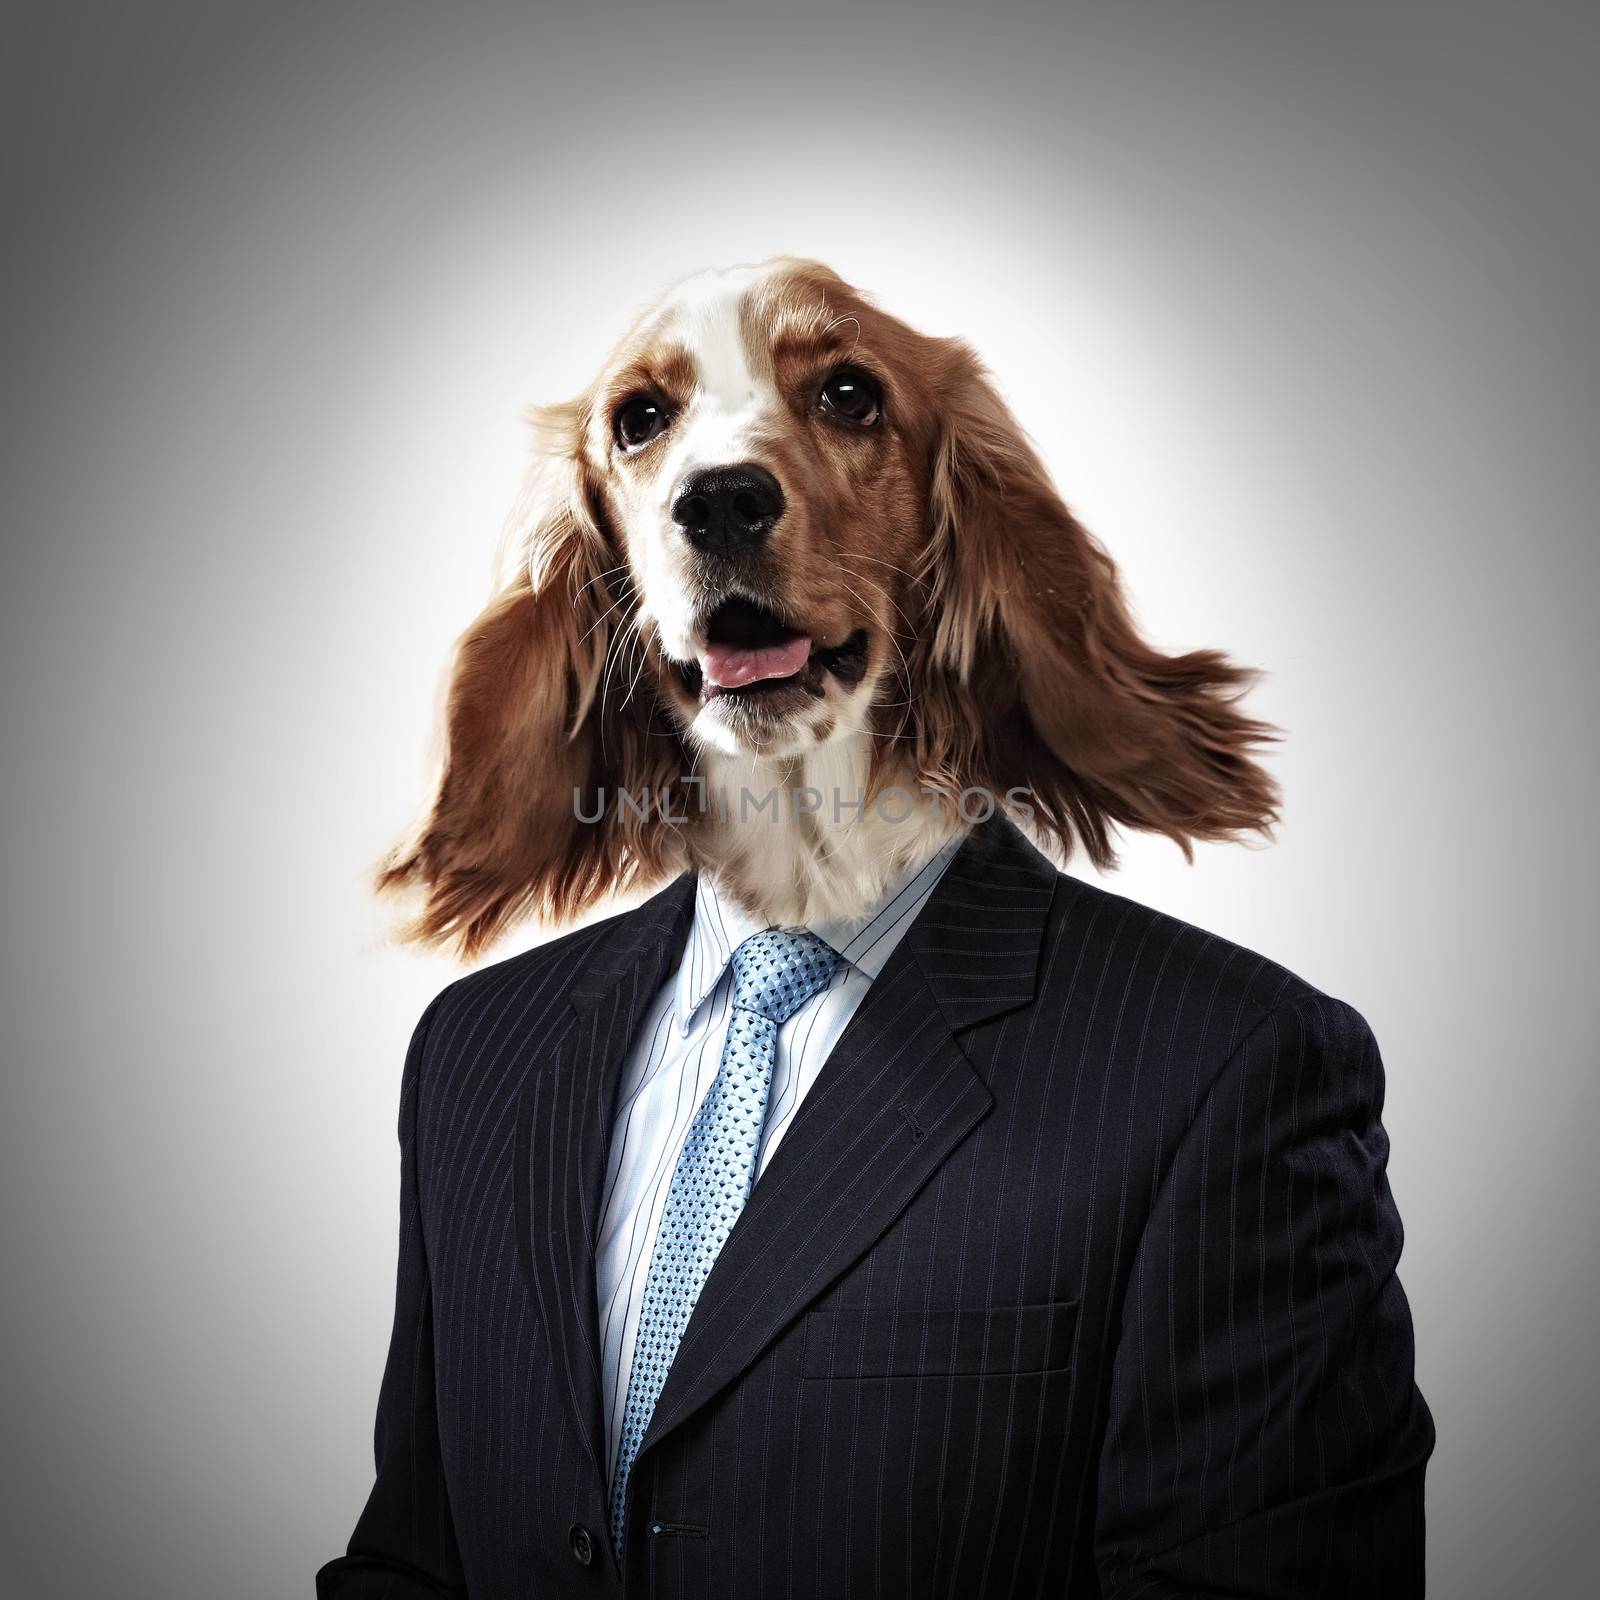 Funny portrait of a dog in a suit by sergey_nivens